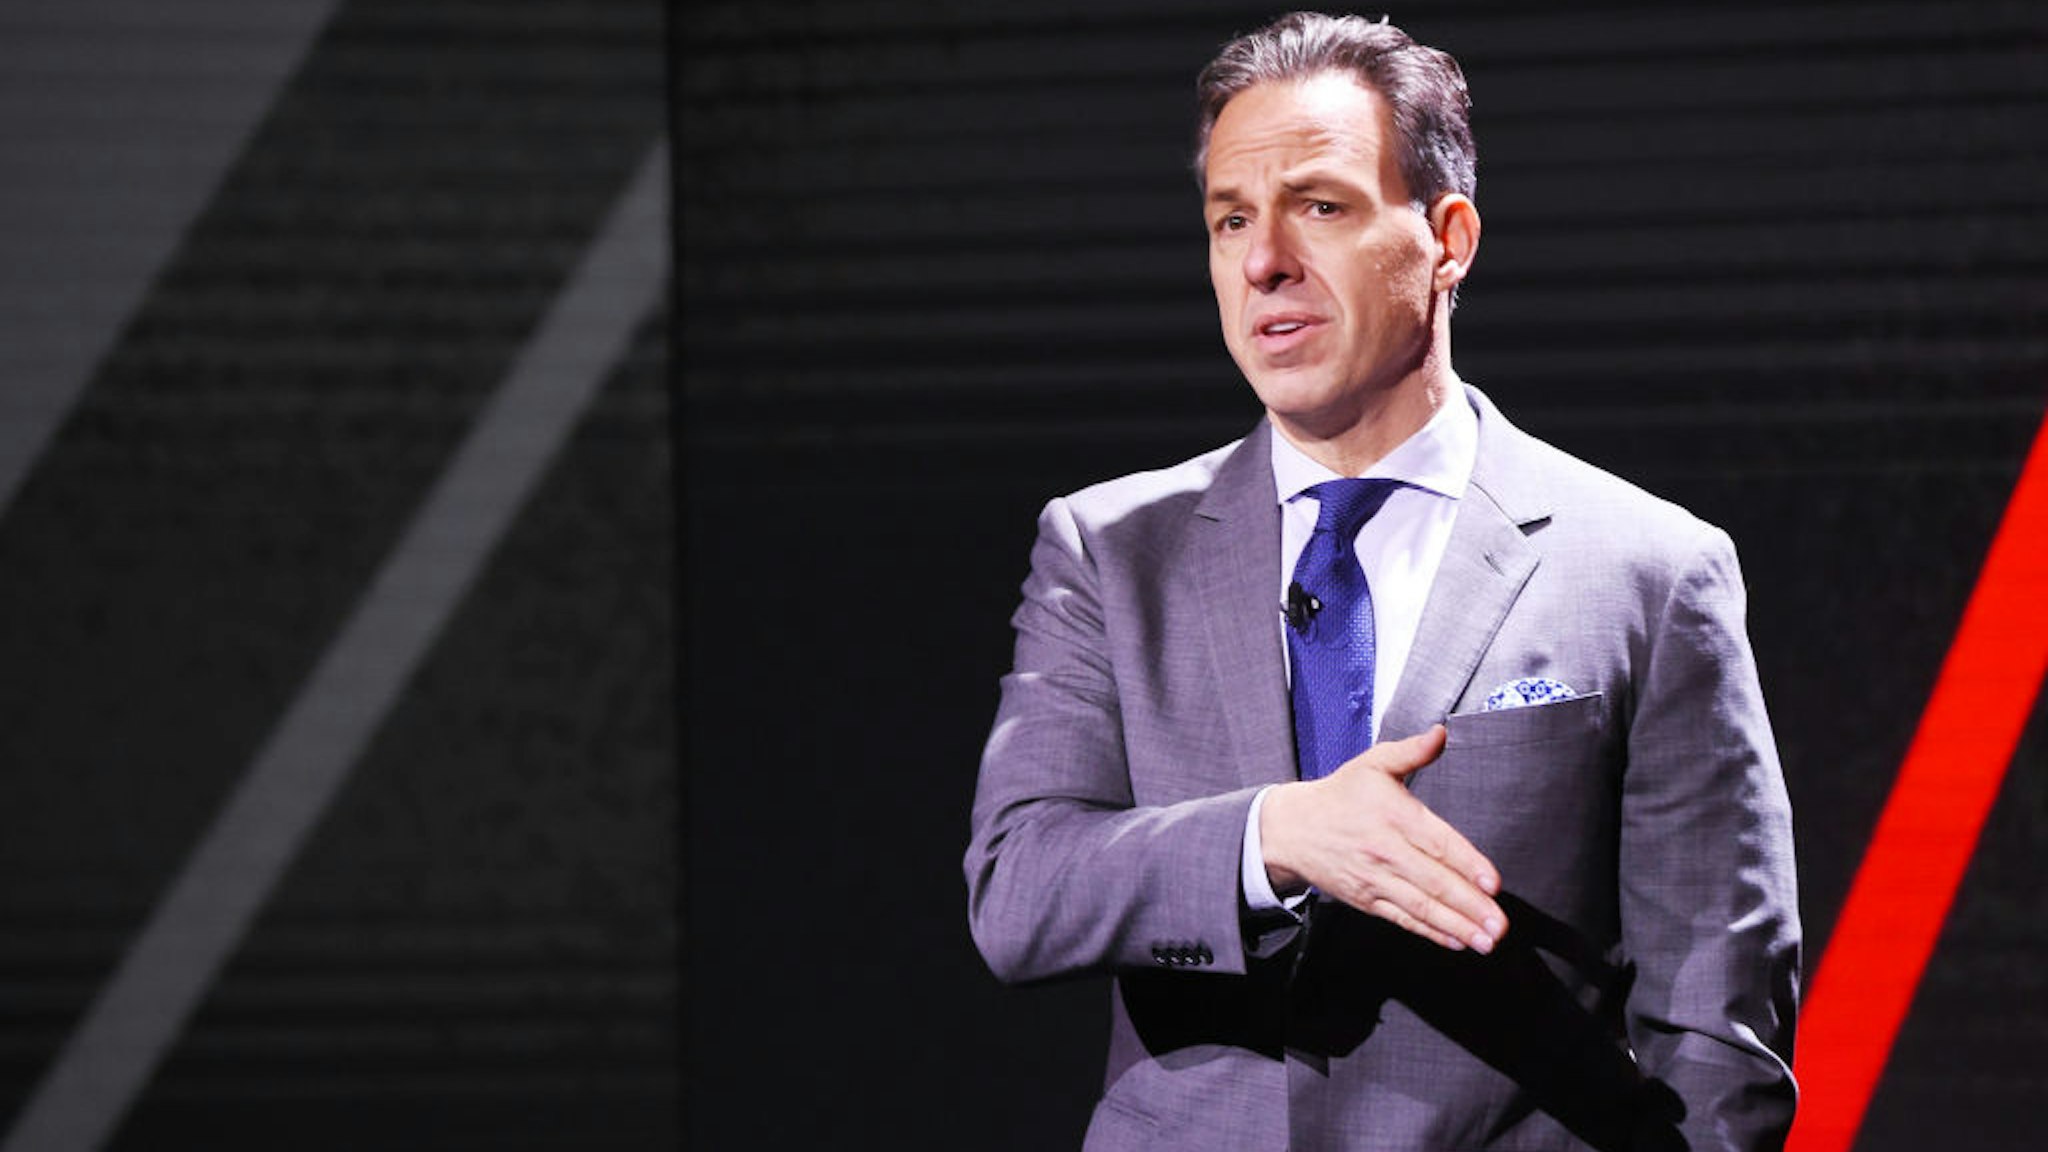 NEW YORK, NEW YORK - MAY 15: Jake Tapper of CNN’s The Lead with Jake Tapper and CNN’s State of the Union with Jake Tapper speaks onstage during the WarnerMedia Upfront 2019 show at The Theater at Madison Square Garden on May 15, 2019 in New York City. 602140 (Photo by Kevin Mazur/Getty Images for WarnerMedia)